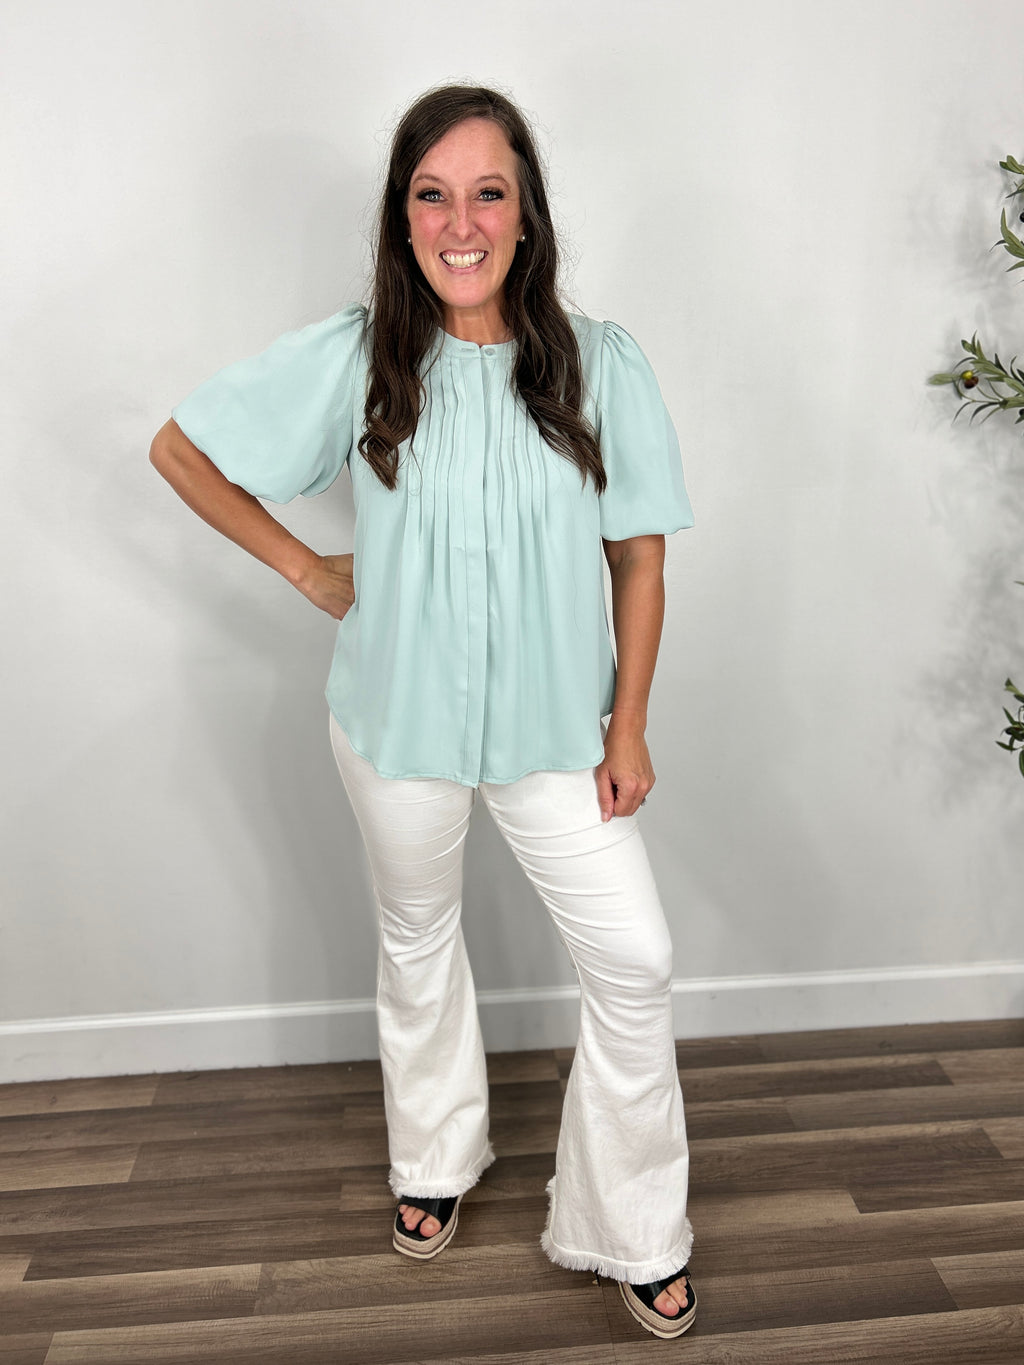 Women's Sophie bubble sleeve button down top in dusty blue paired with white flare jeggings and black wedge sandals.